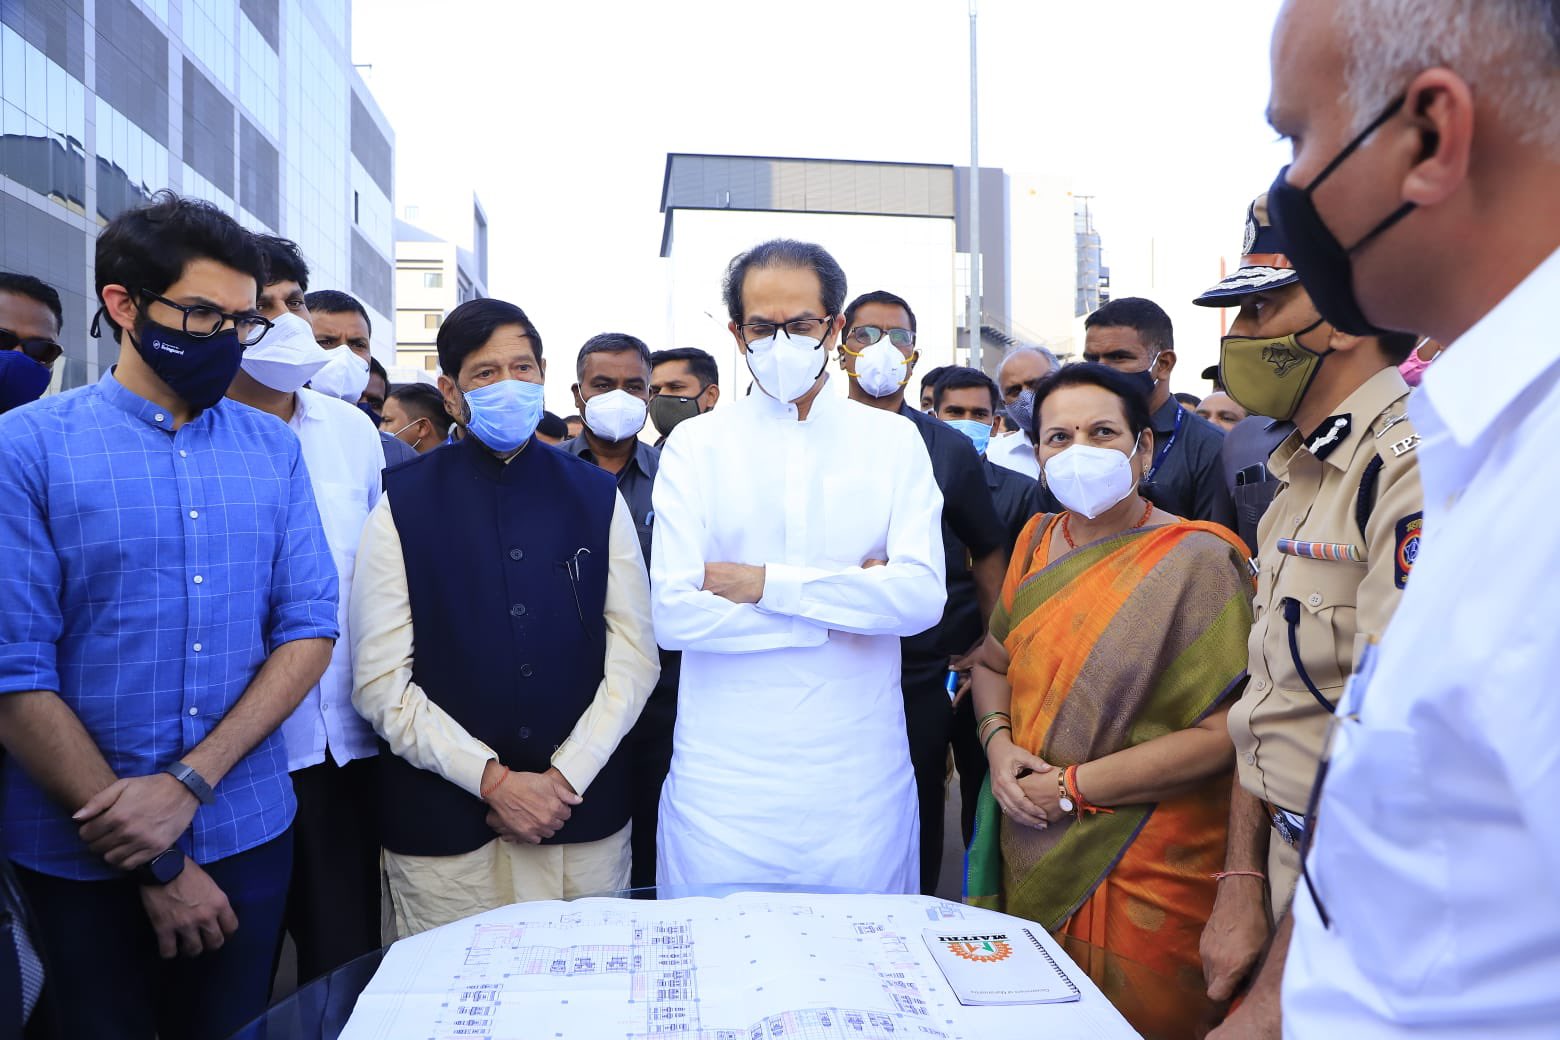 Chief Minister Uddhav Thackeray's visit to Serum Institute; Discussion with Poonawala